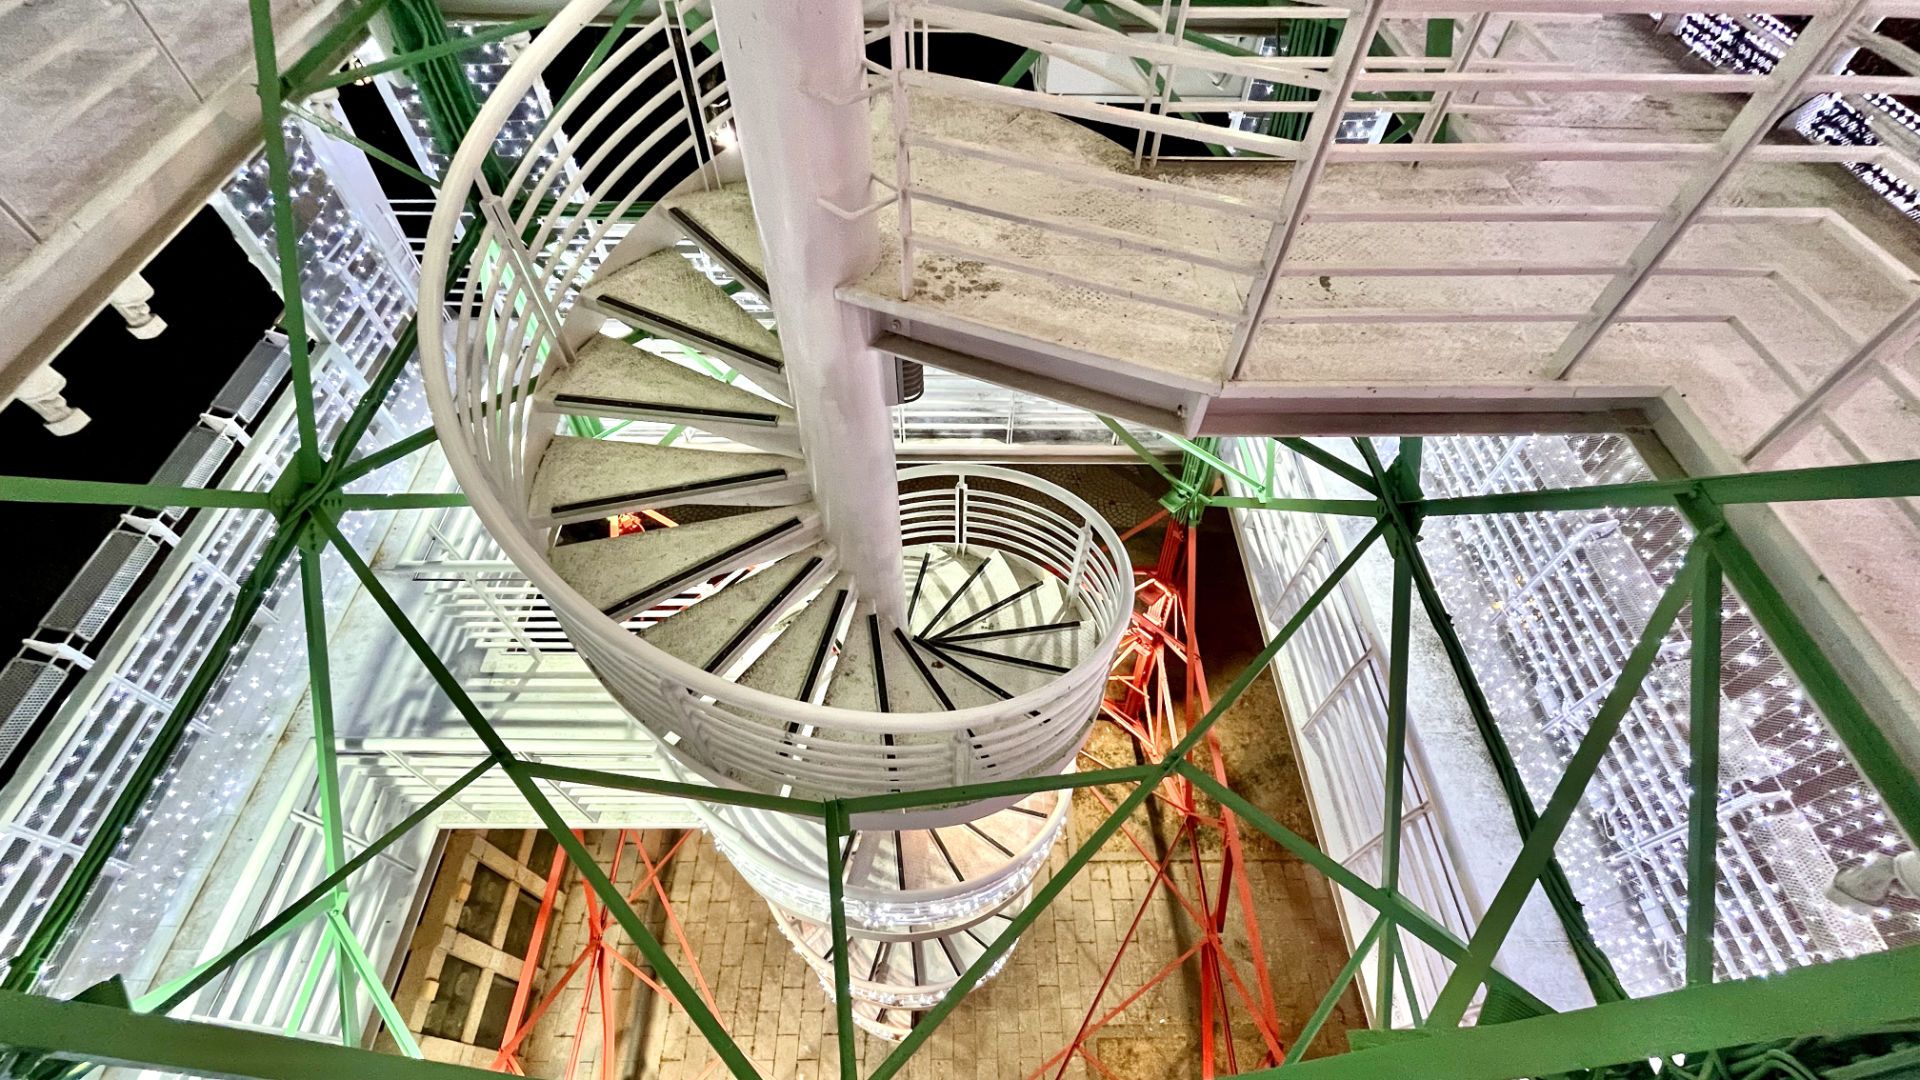 Looking down the spiral staircase from the top.